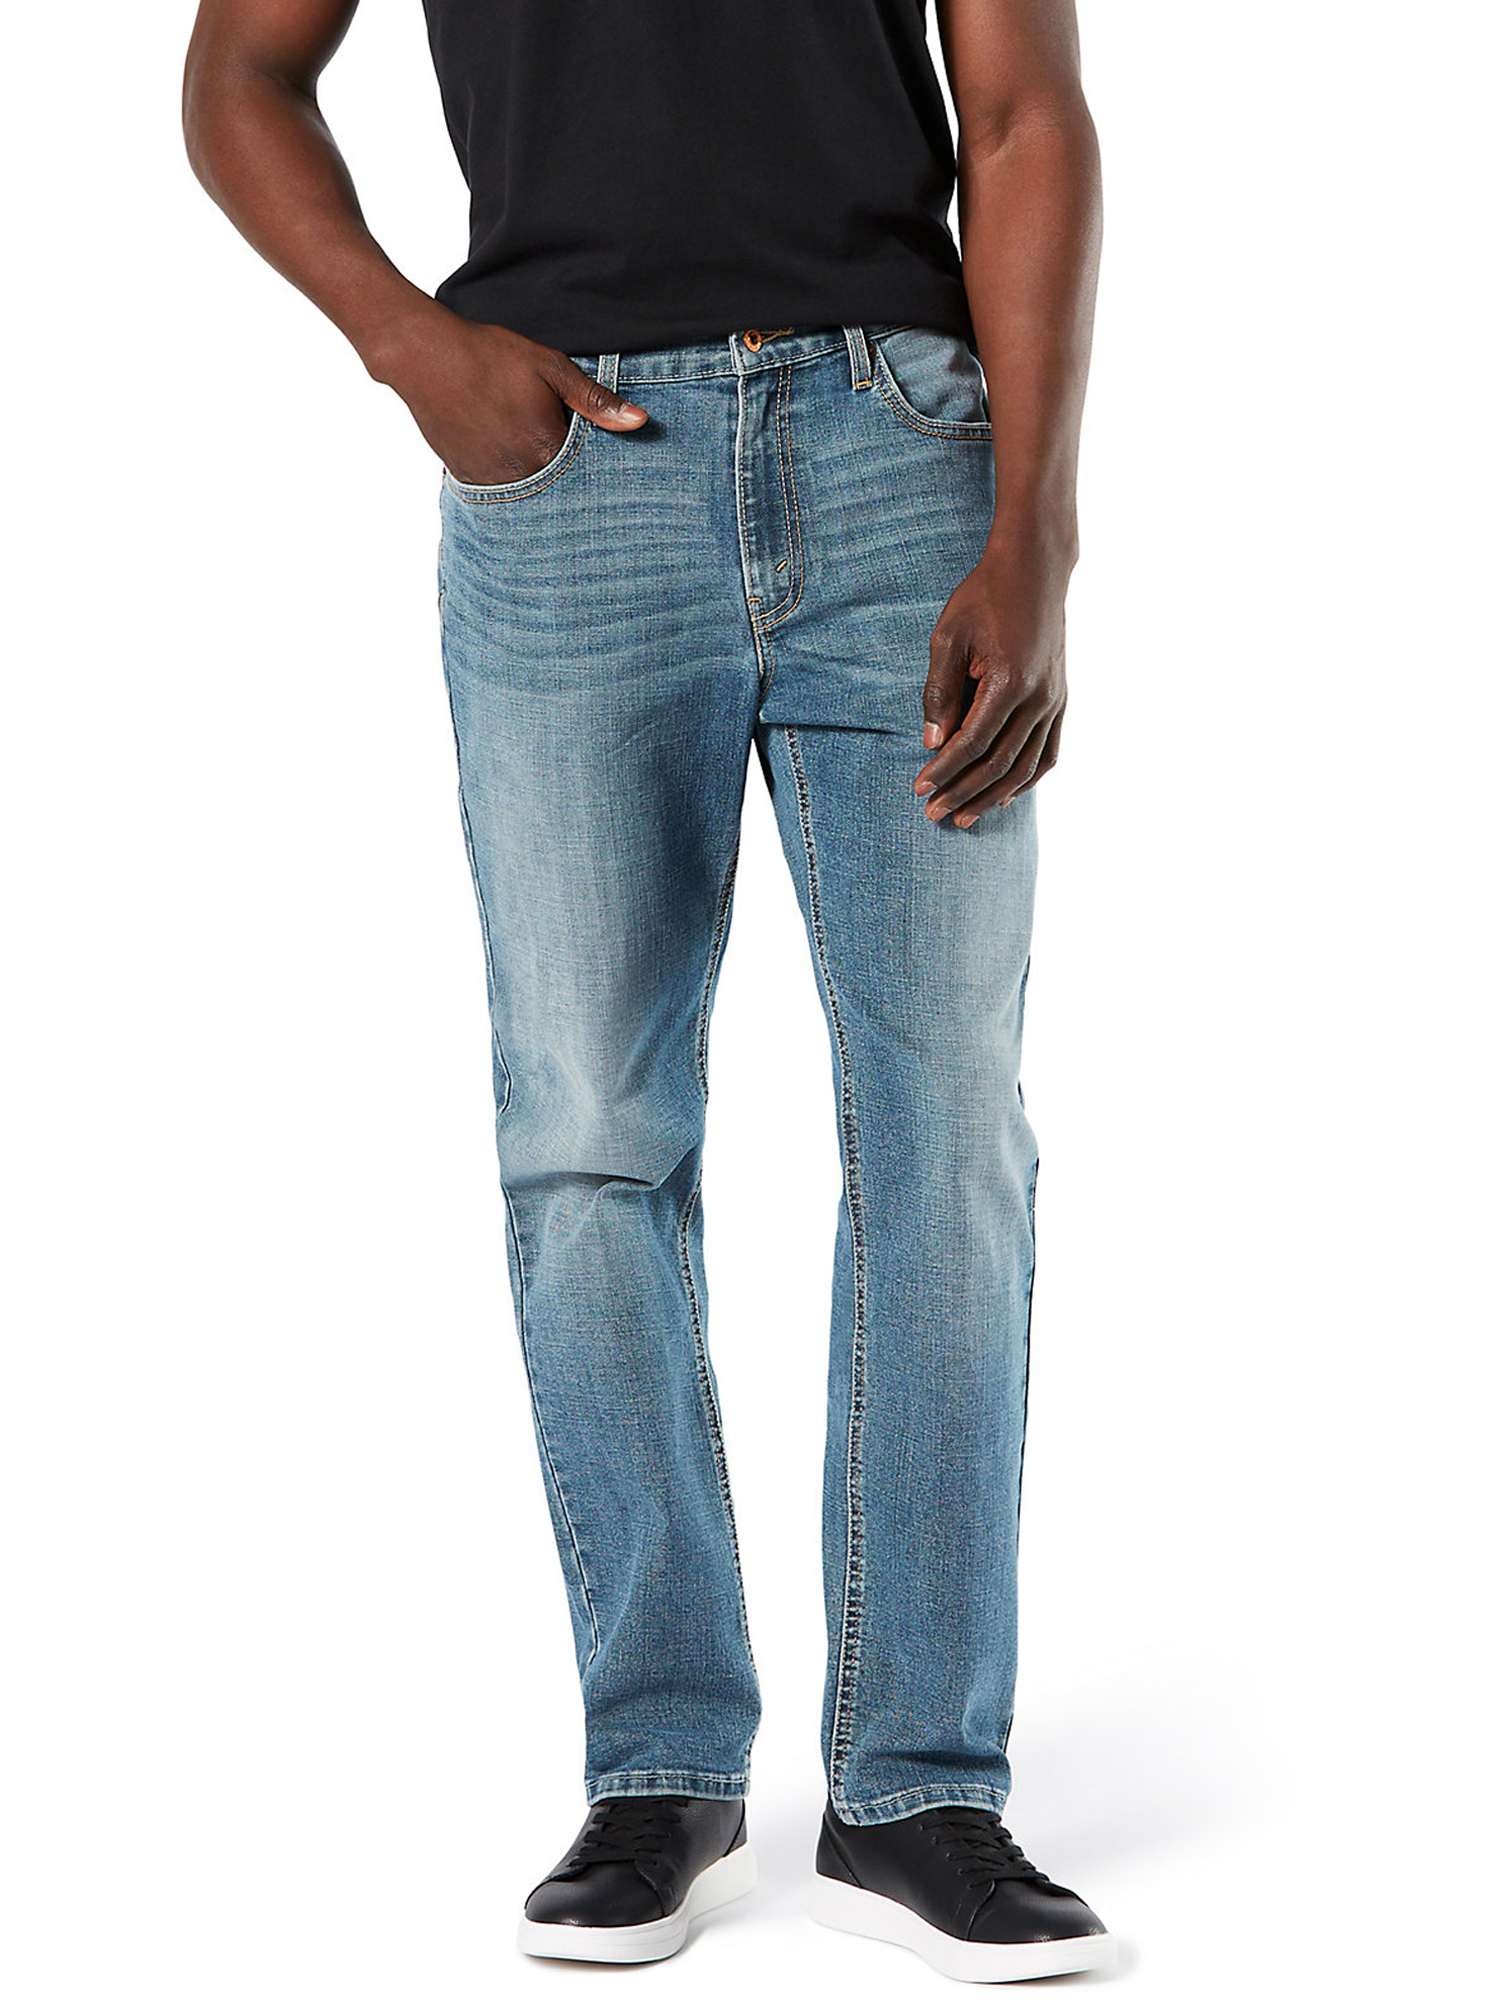 Signature by Levi Strauss & Co. Men's and Big and Tall Athletic Fit Jeans - image 1 of 5